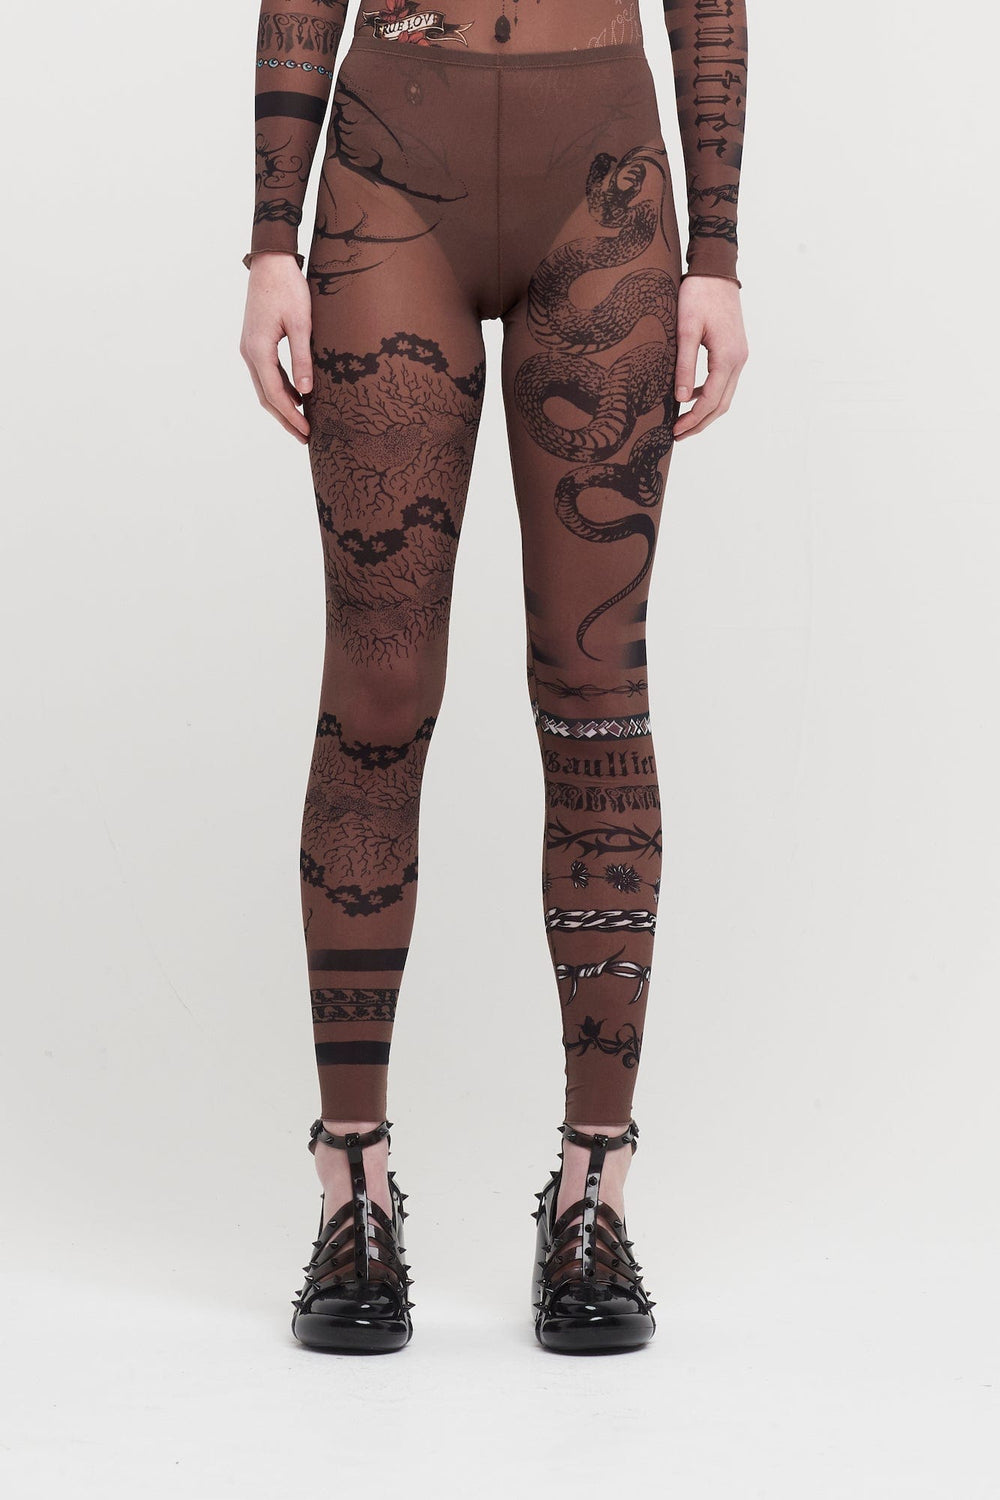 Jean Paul Gaultier X KNWLS Leggings Printed Trompe l'oeil Tattoo – Antidote  Fashion and Lifestyle